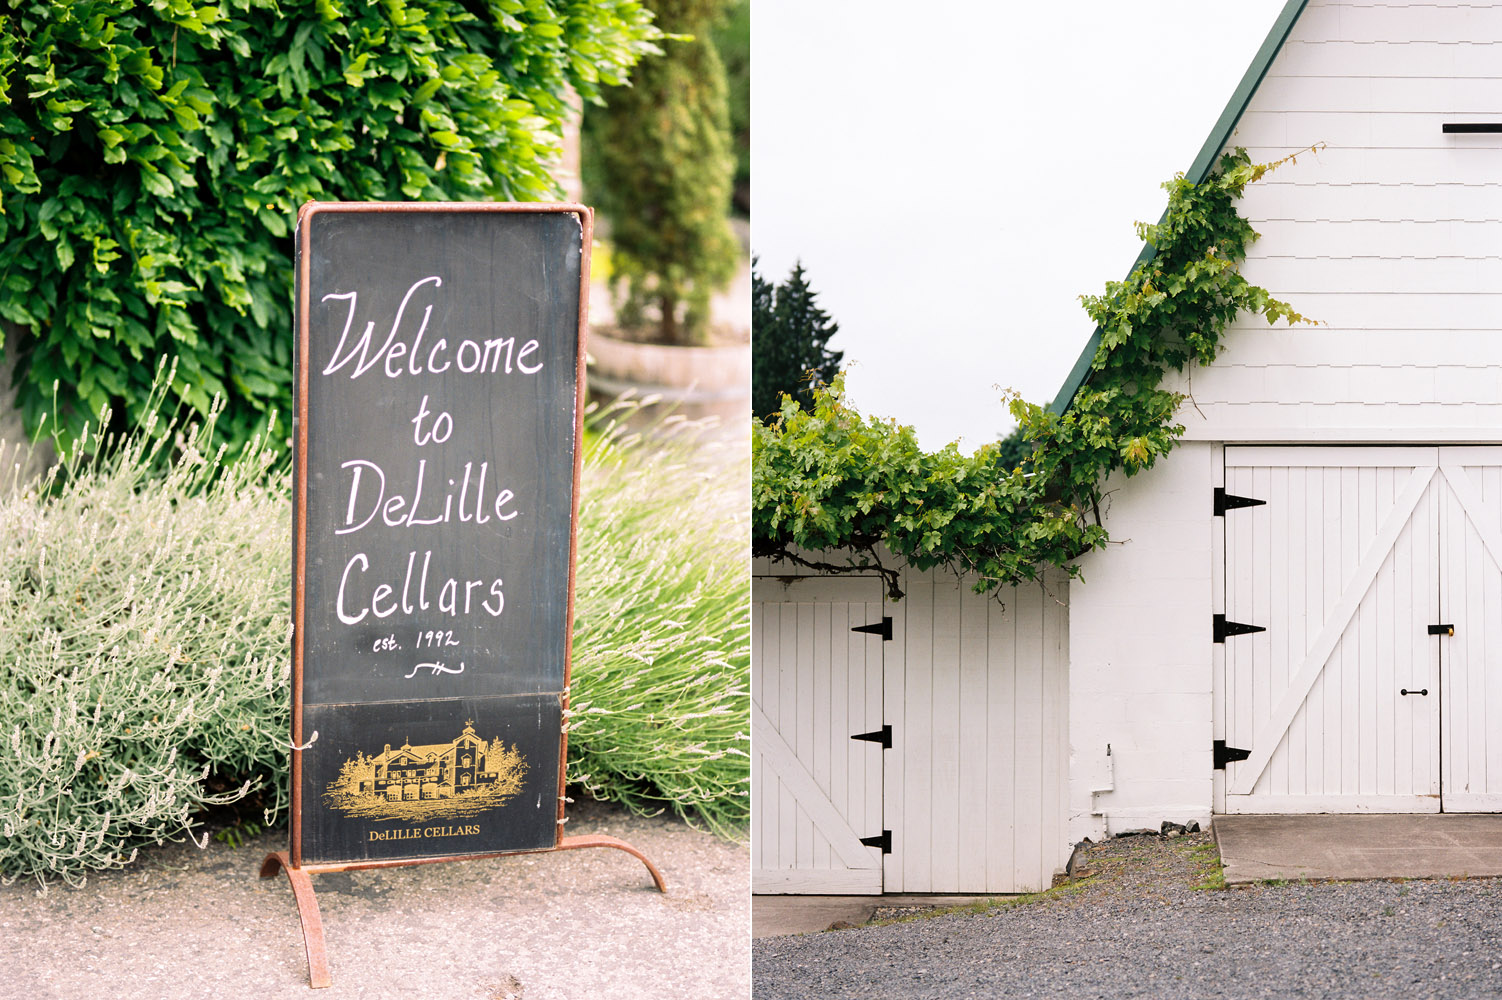 delille cellars woodinville winery wedding venue detail decor photography.jpg